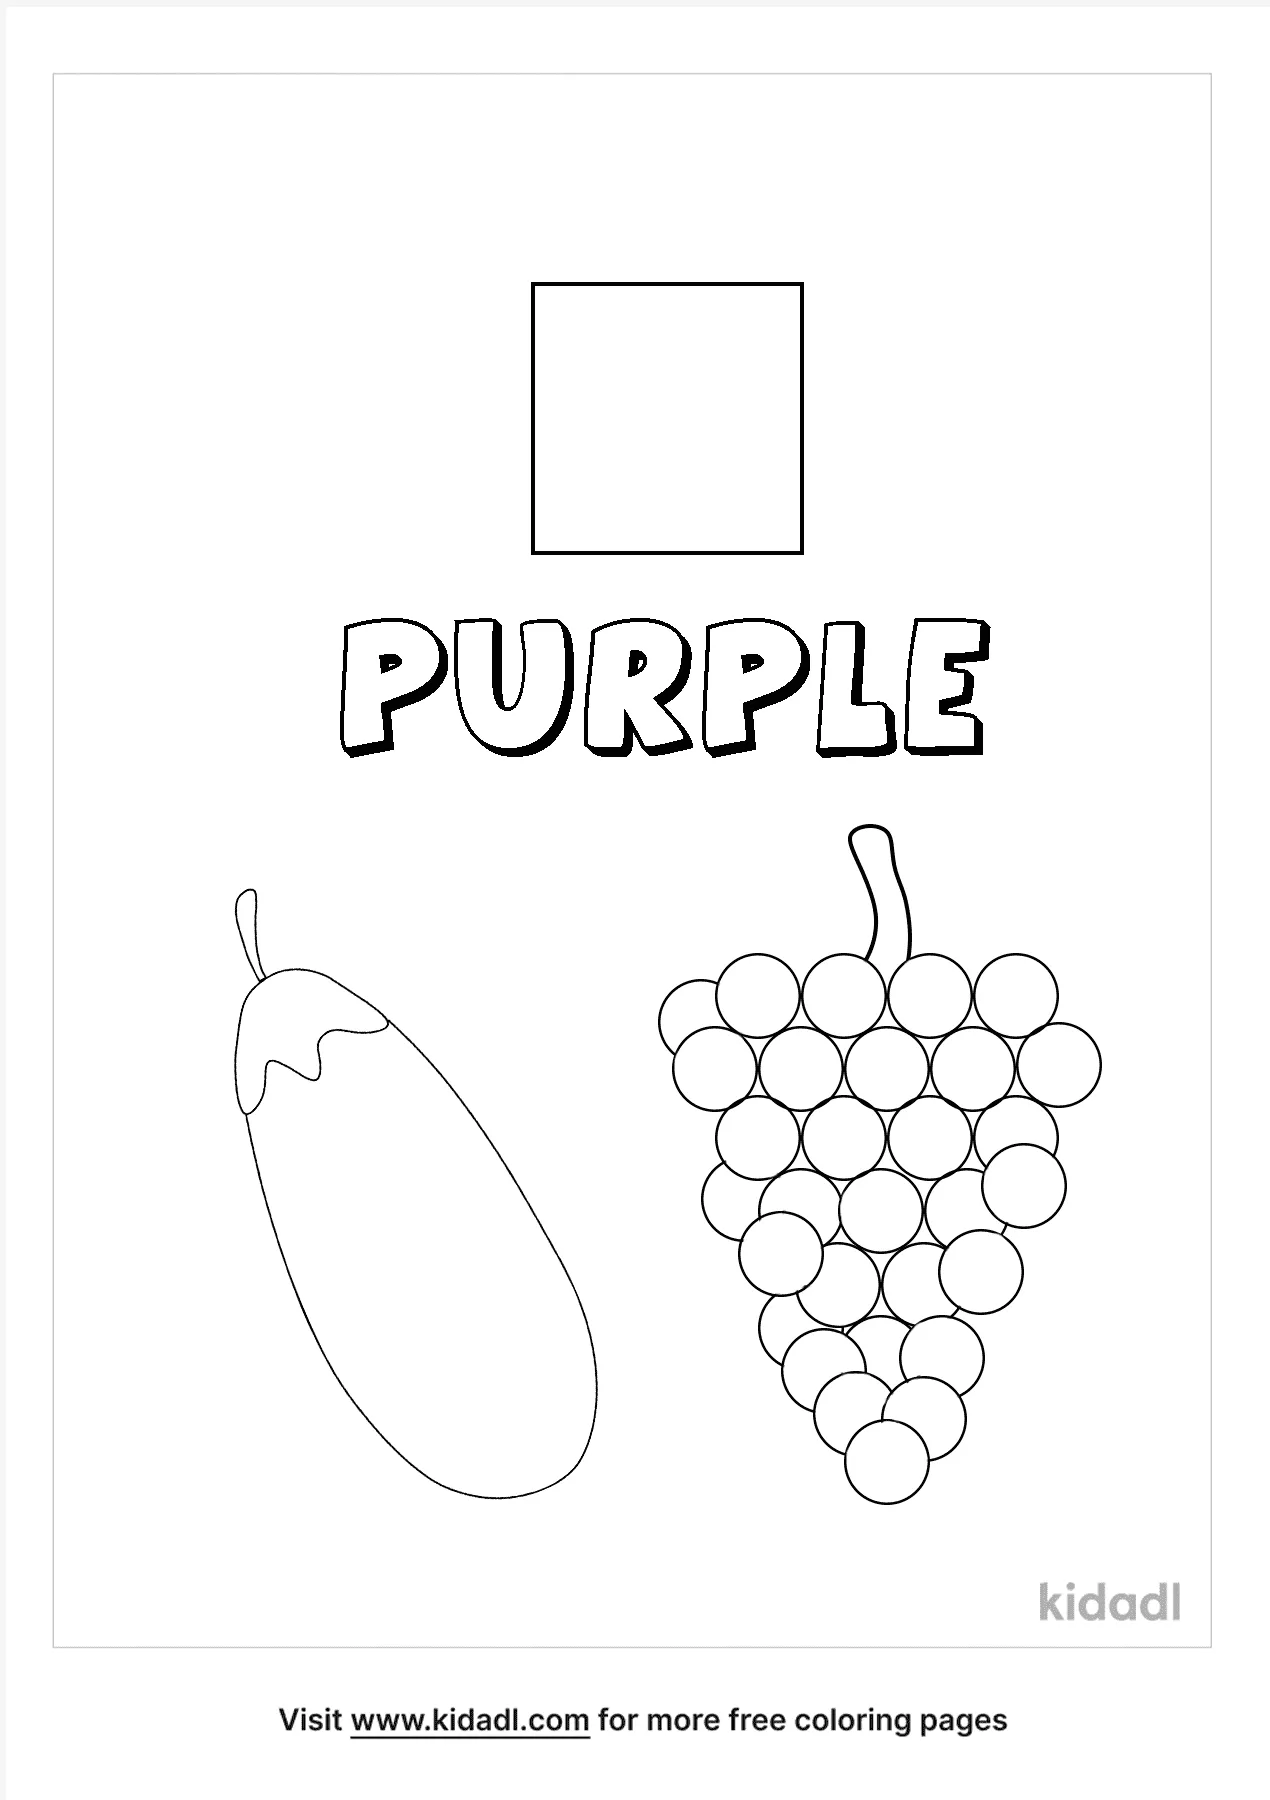 Free purple coloring page coloring page printables